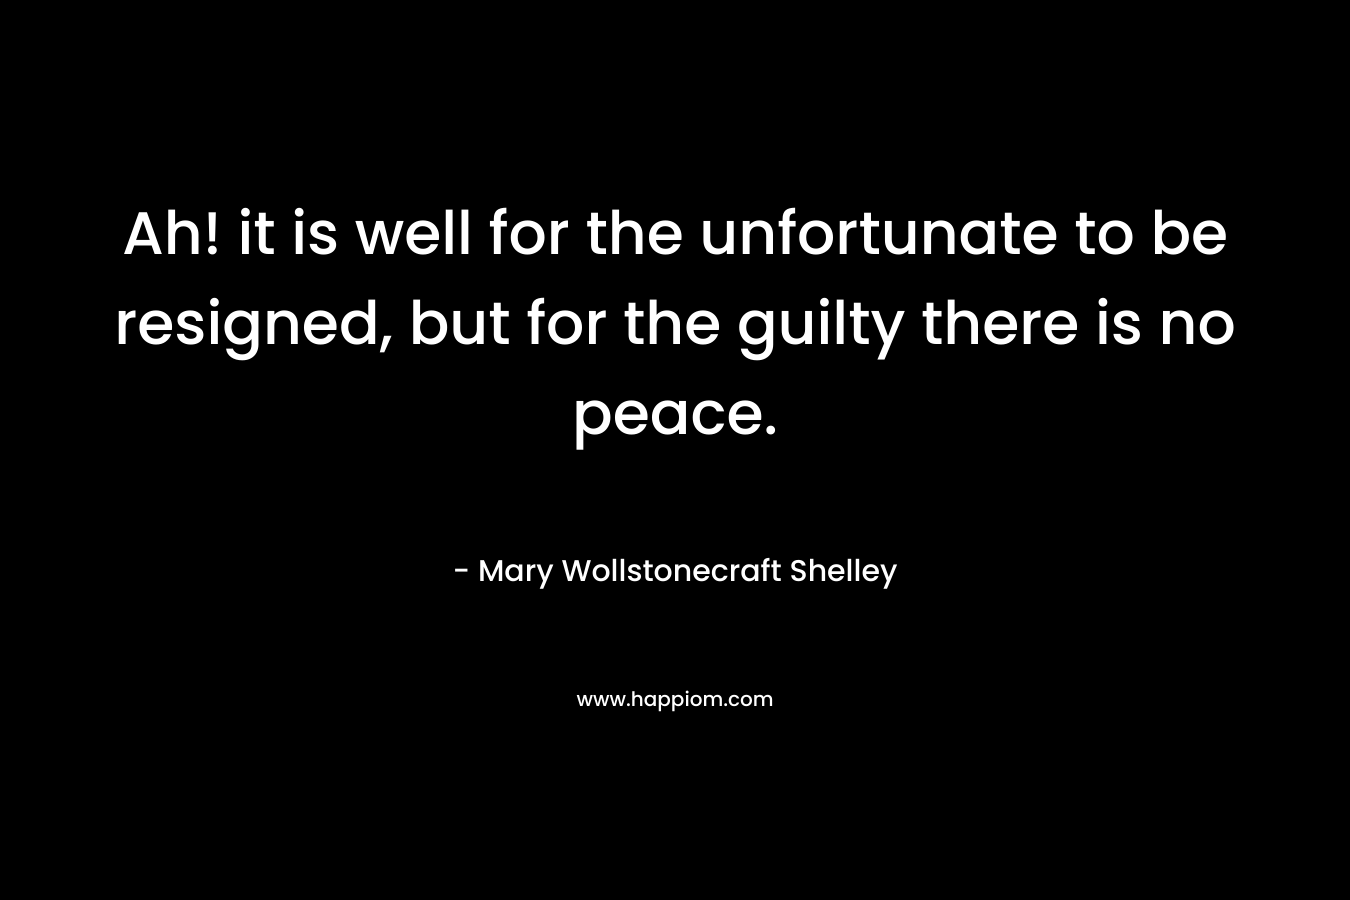 Ah! it is well for the unfortunate to be resigned, but for the guilty there is no peace. – Mary Wollstonecraft Shelley